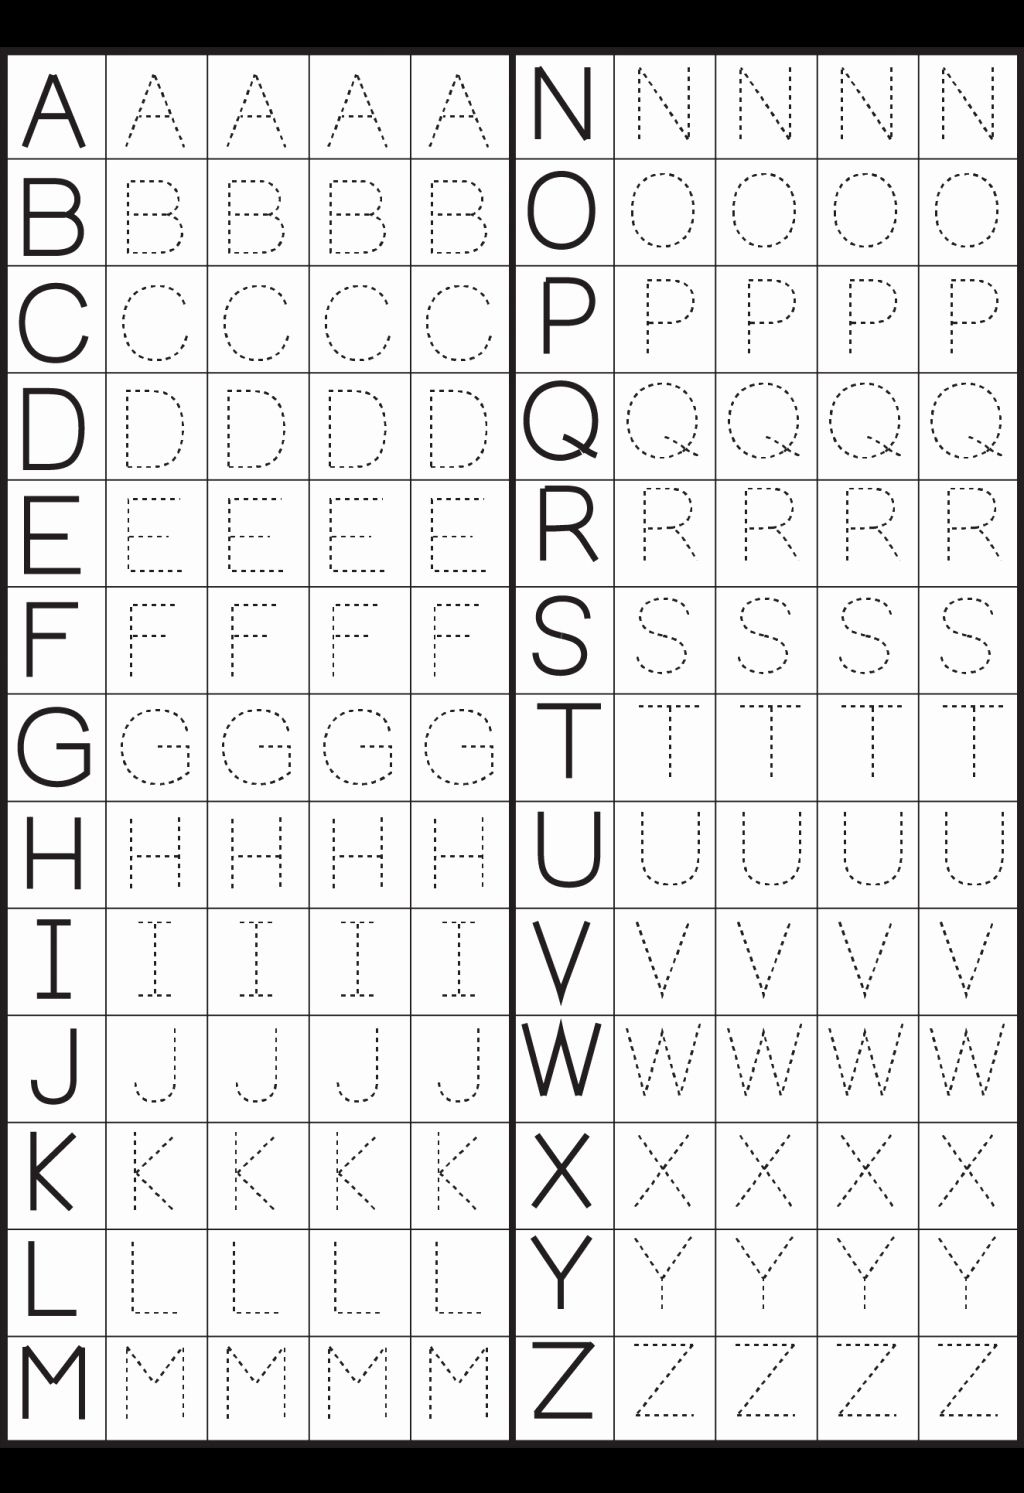 Alphabet Coloring Worksheets A-Z Pdf Fresh Worksheet Ideas pertaining to Alphabet Tracing A-Z Pdf